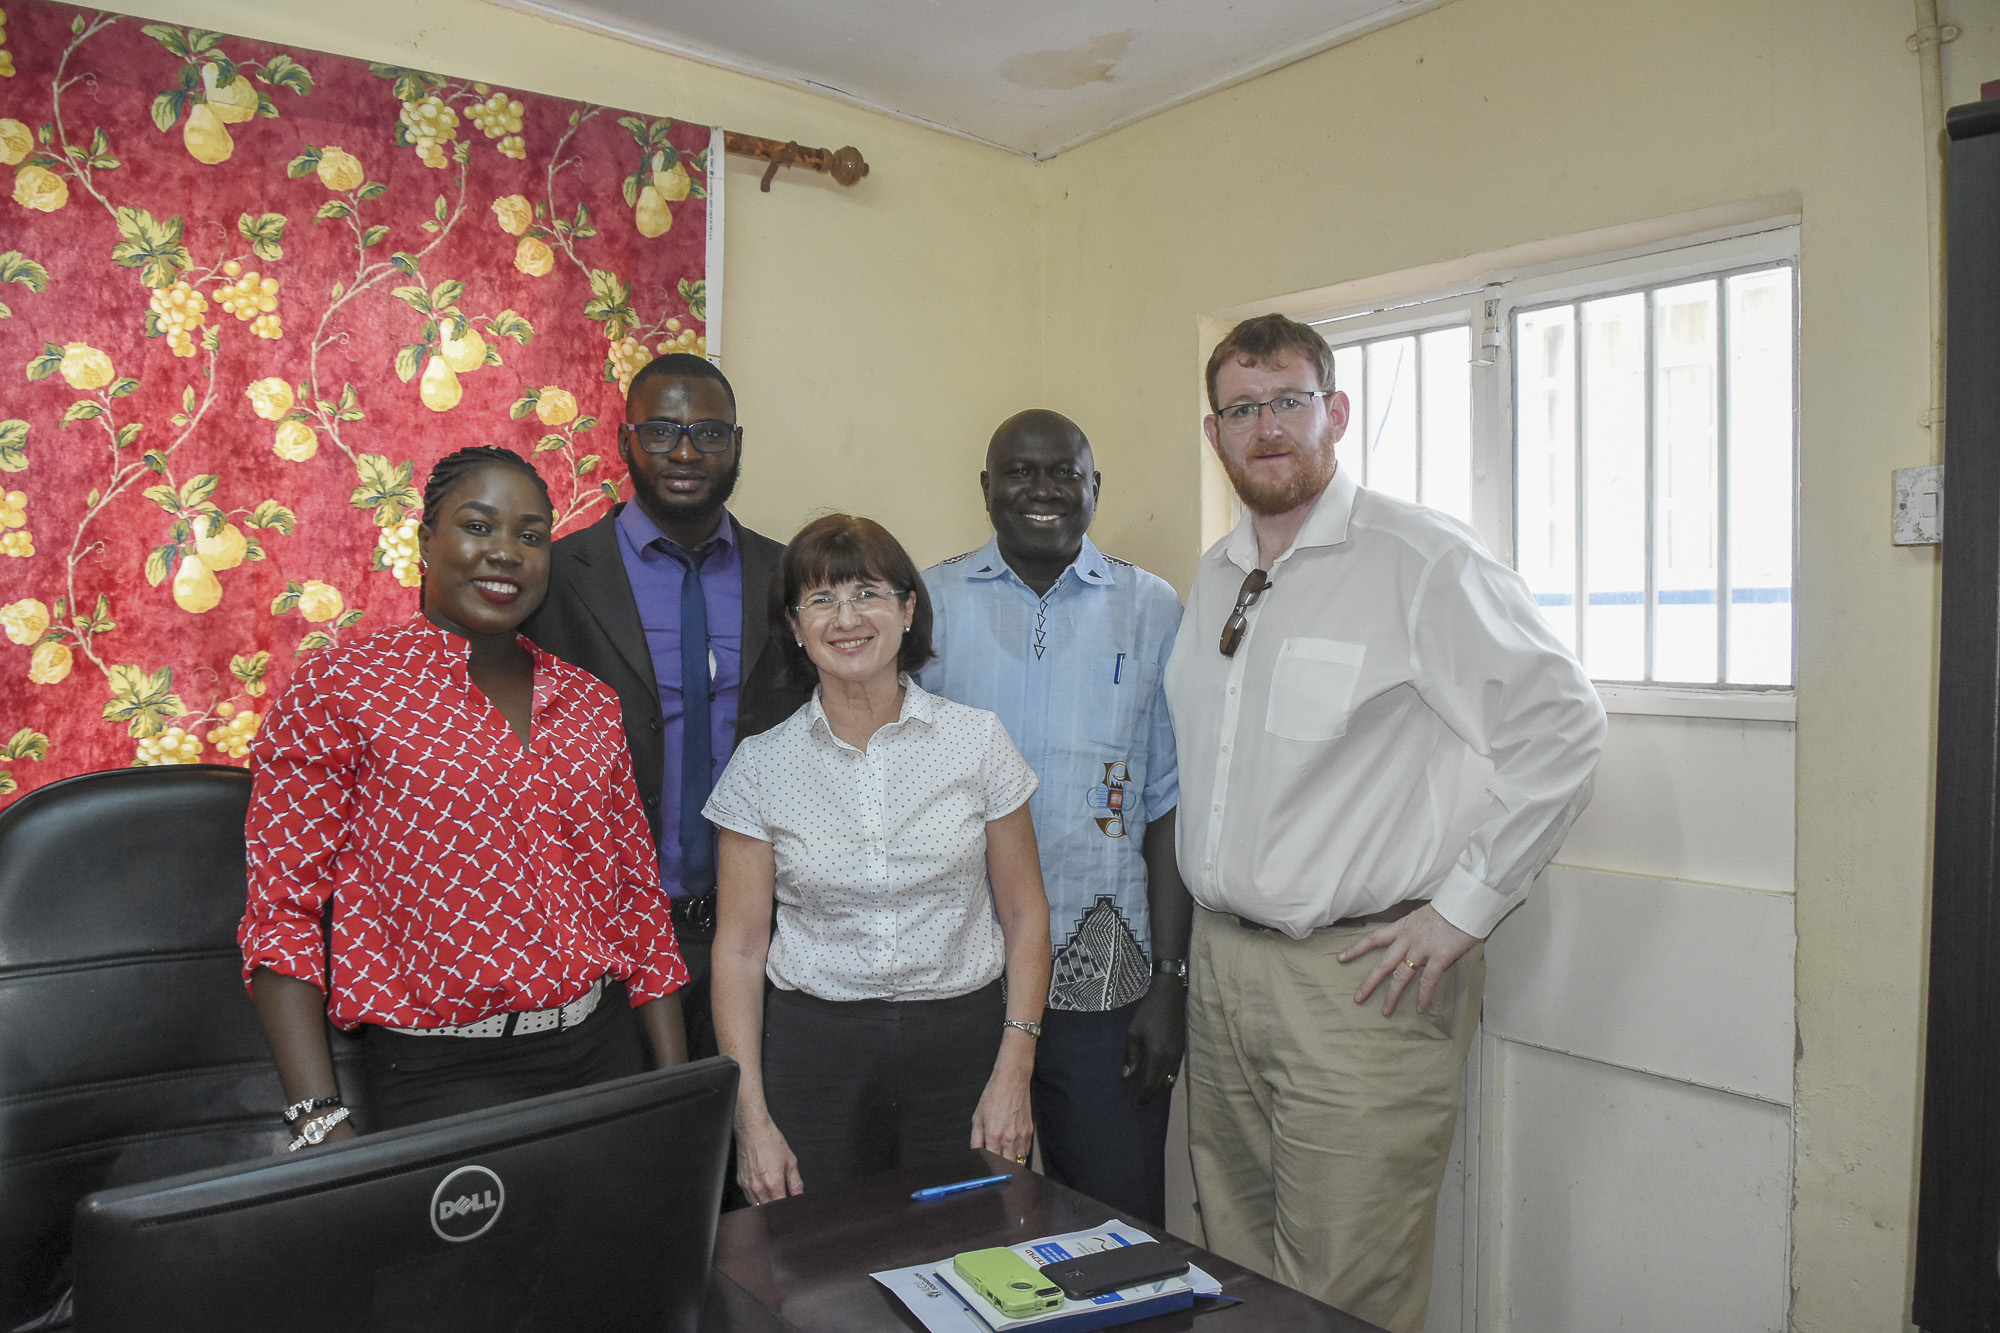 Aji Fatou Njie (GAMTEL Credit Union Loans Officer), Ousman S. Drammeh (GAMTEL Credit Union Operations Officer), Rosaleen Bradley (Newington Credit Union), Foday Sanyang (NACCUG Operations Manager) and Michael Byrne (Core Credit Union)